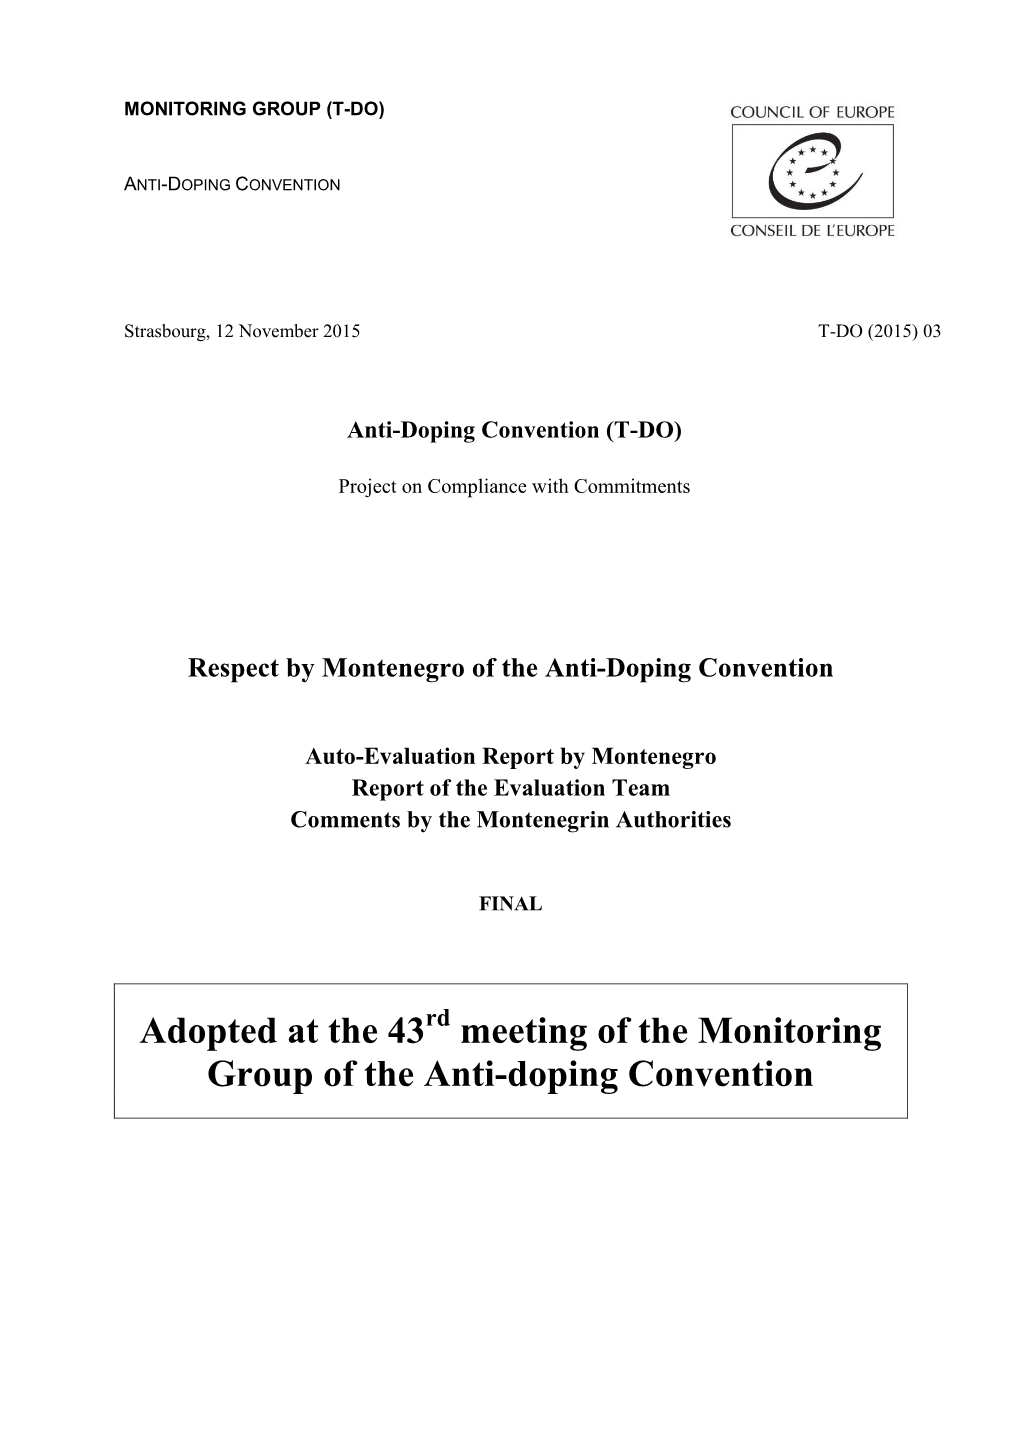 Adopted at the 43 Meeting of the Monitoring Group of the Anti-Doping